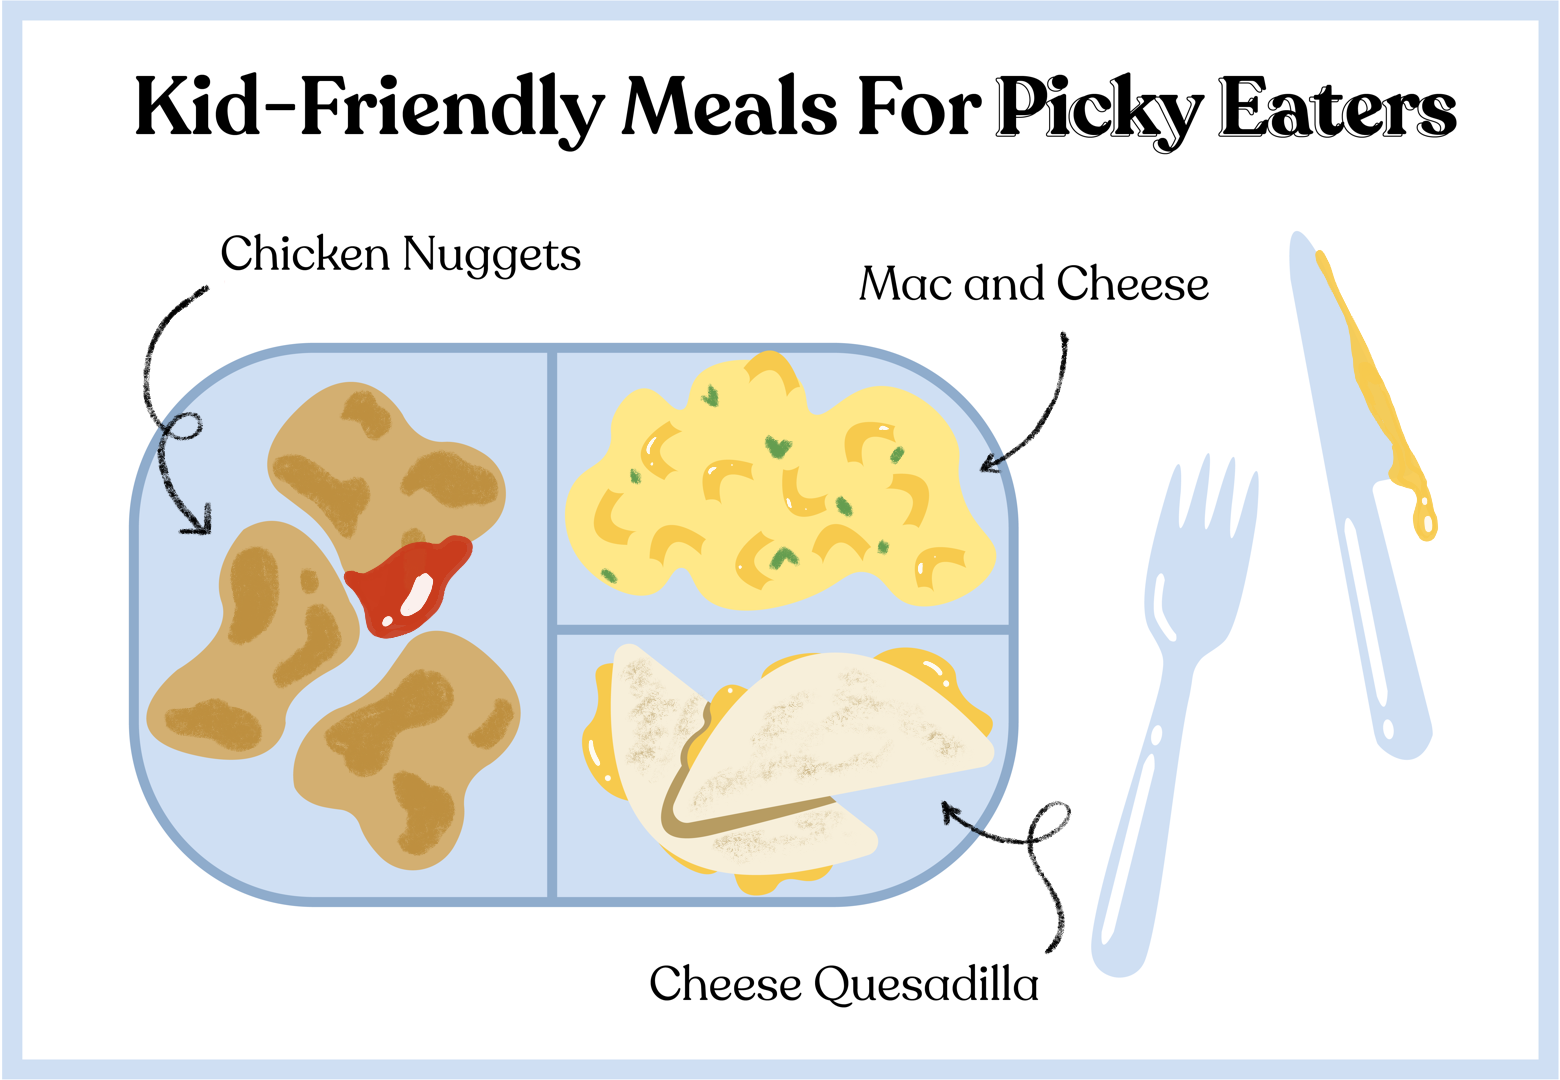 Kid friendly meals for picky eaters